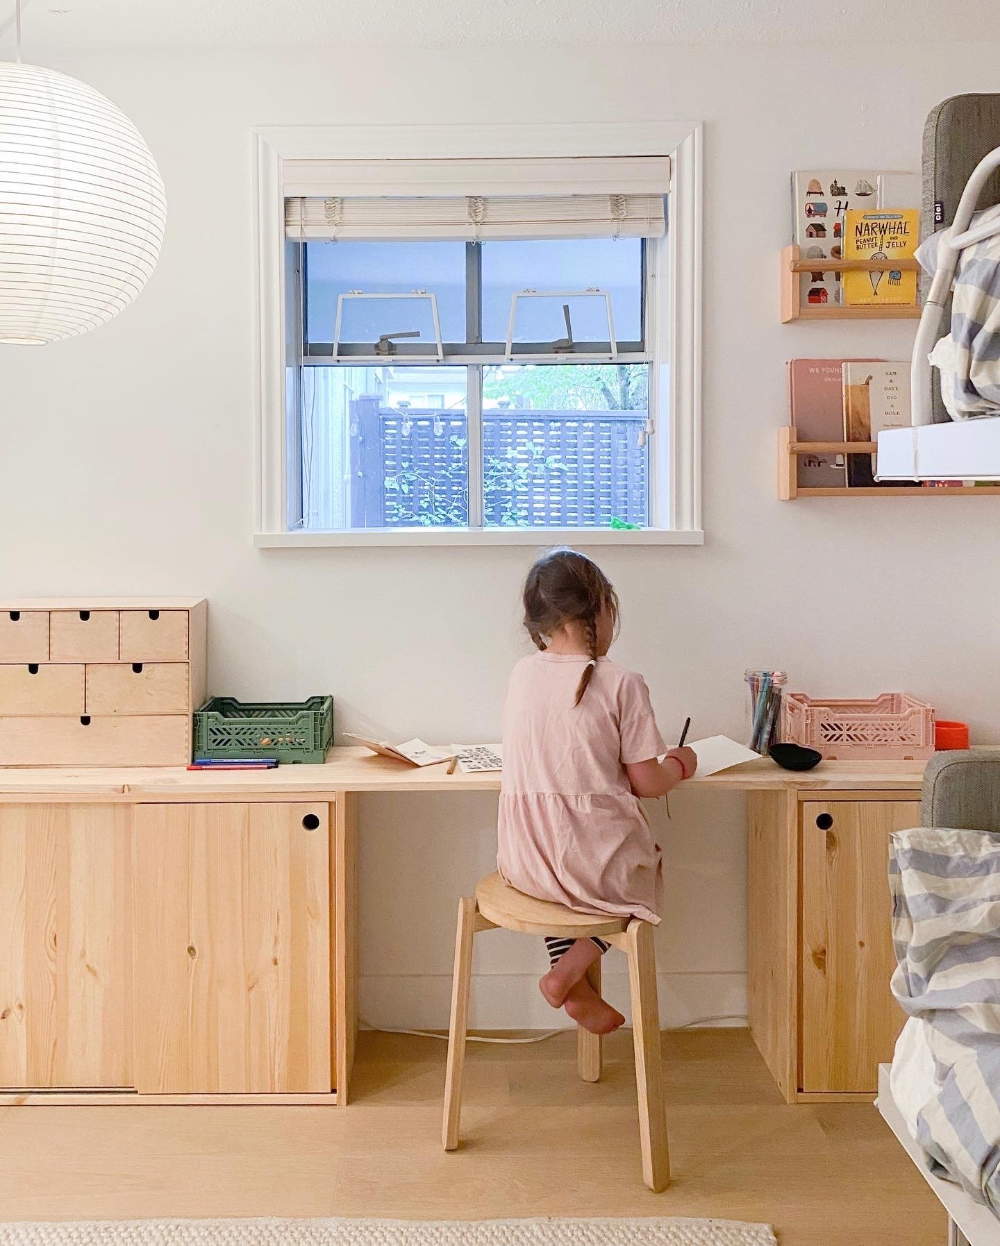 Get A Kids Room Storage For Your Little
One